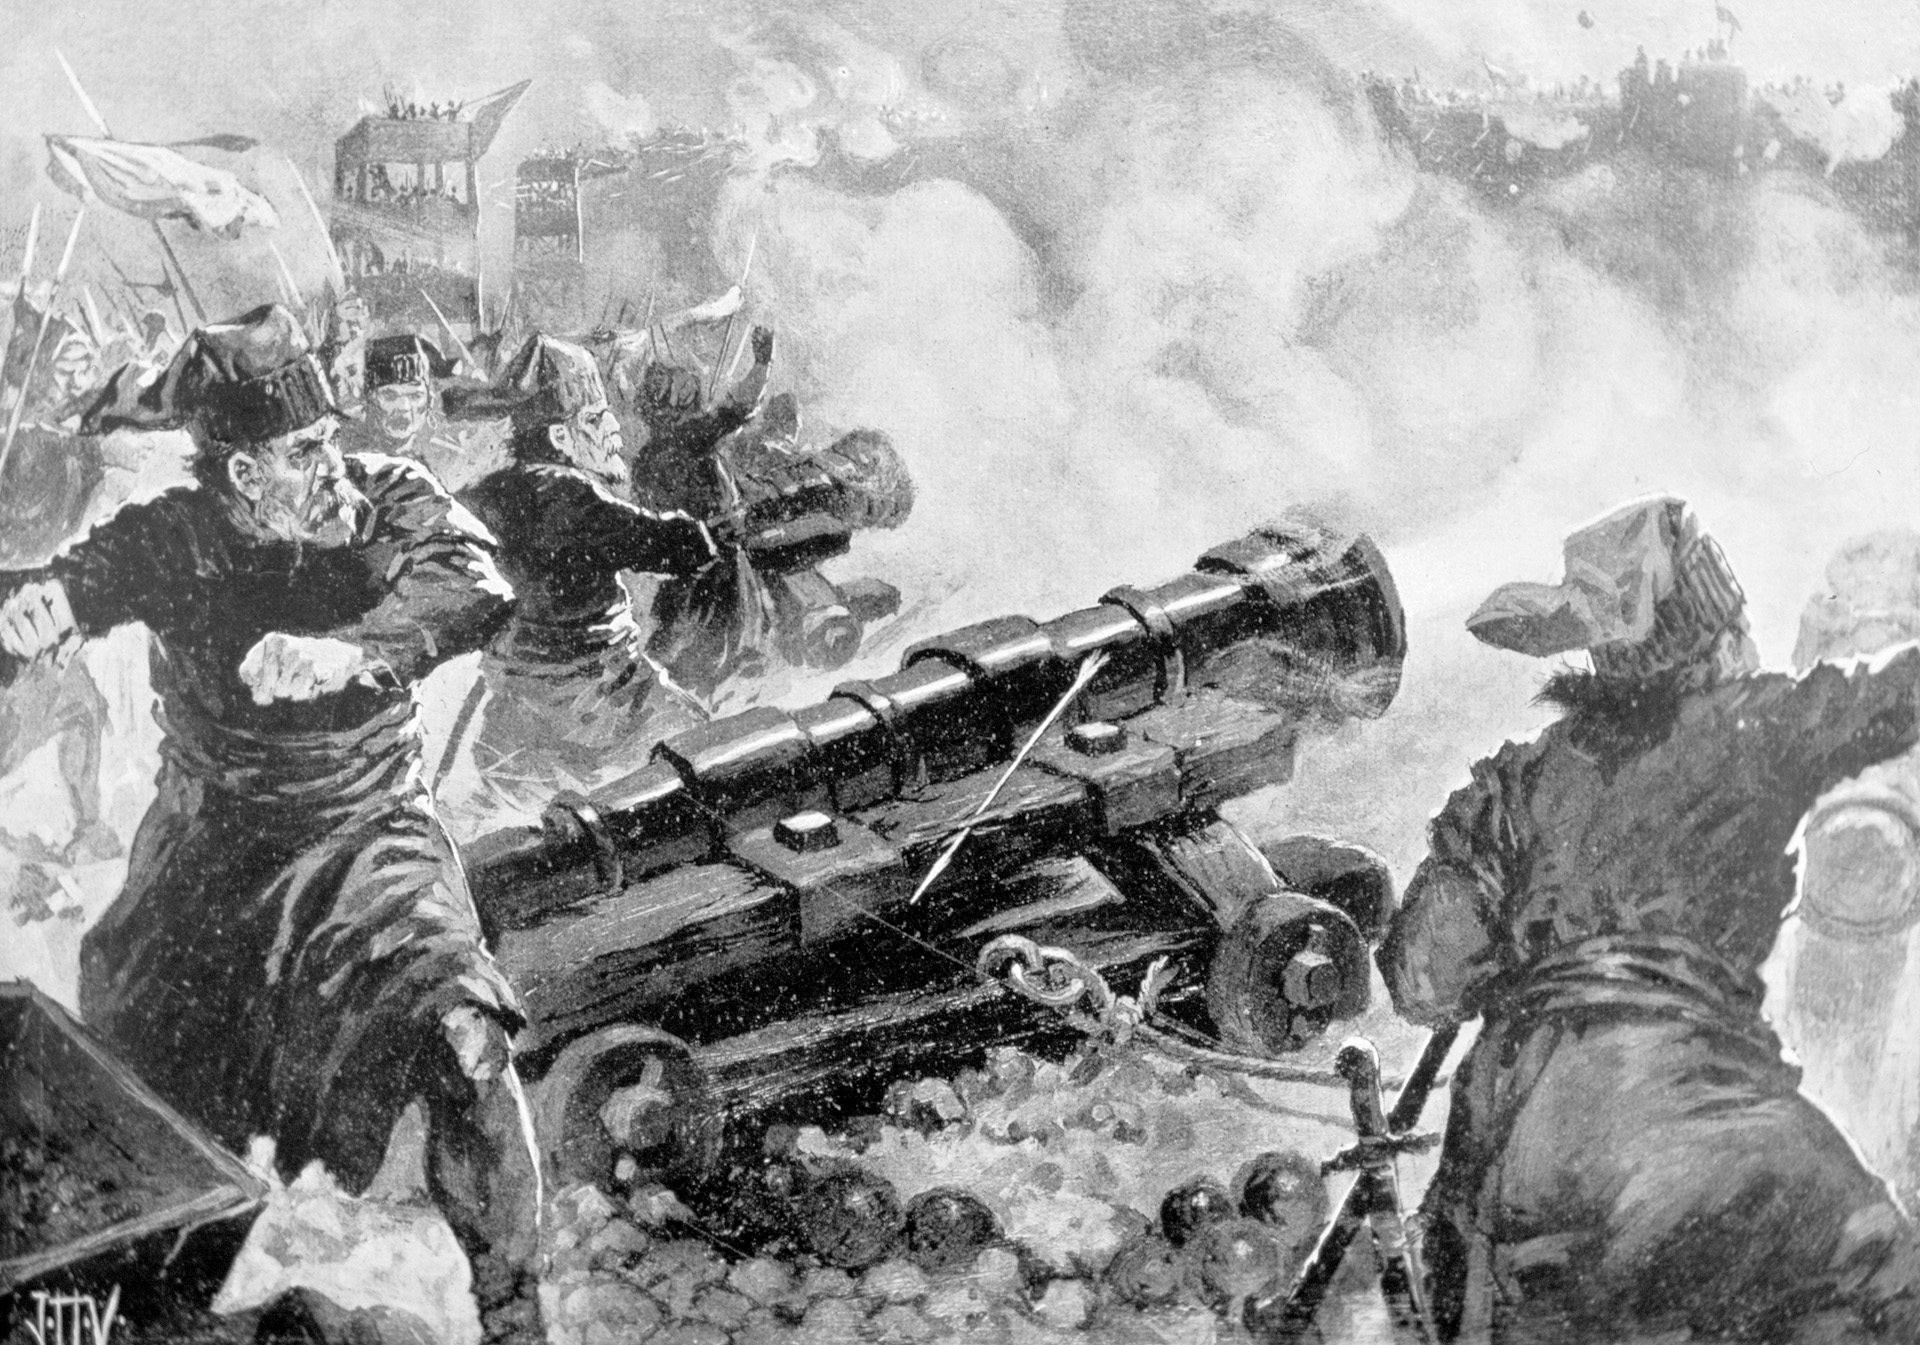 Turks blast away at the walls of Constantinople. The Turks had 200 cannon, including one 26 feet long.